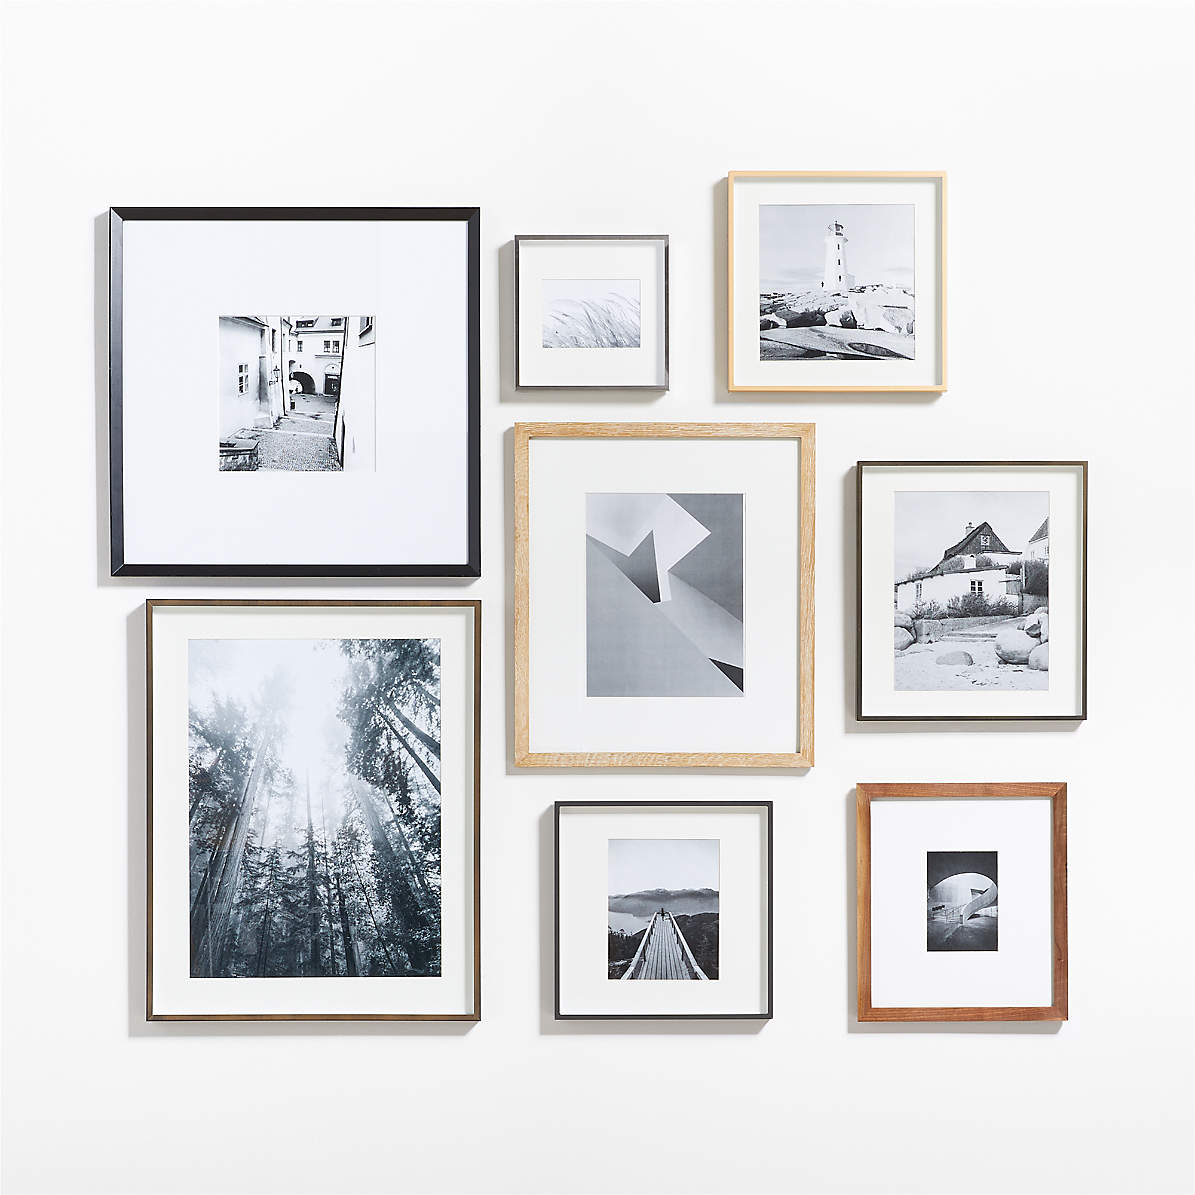 Gallery Soft Black Picture Frames with White Mats, CB2